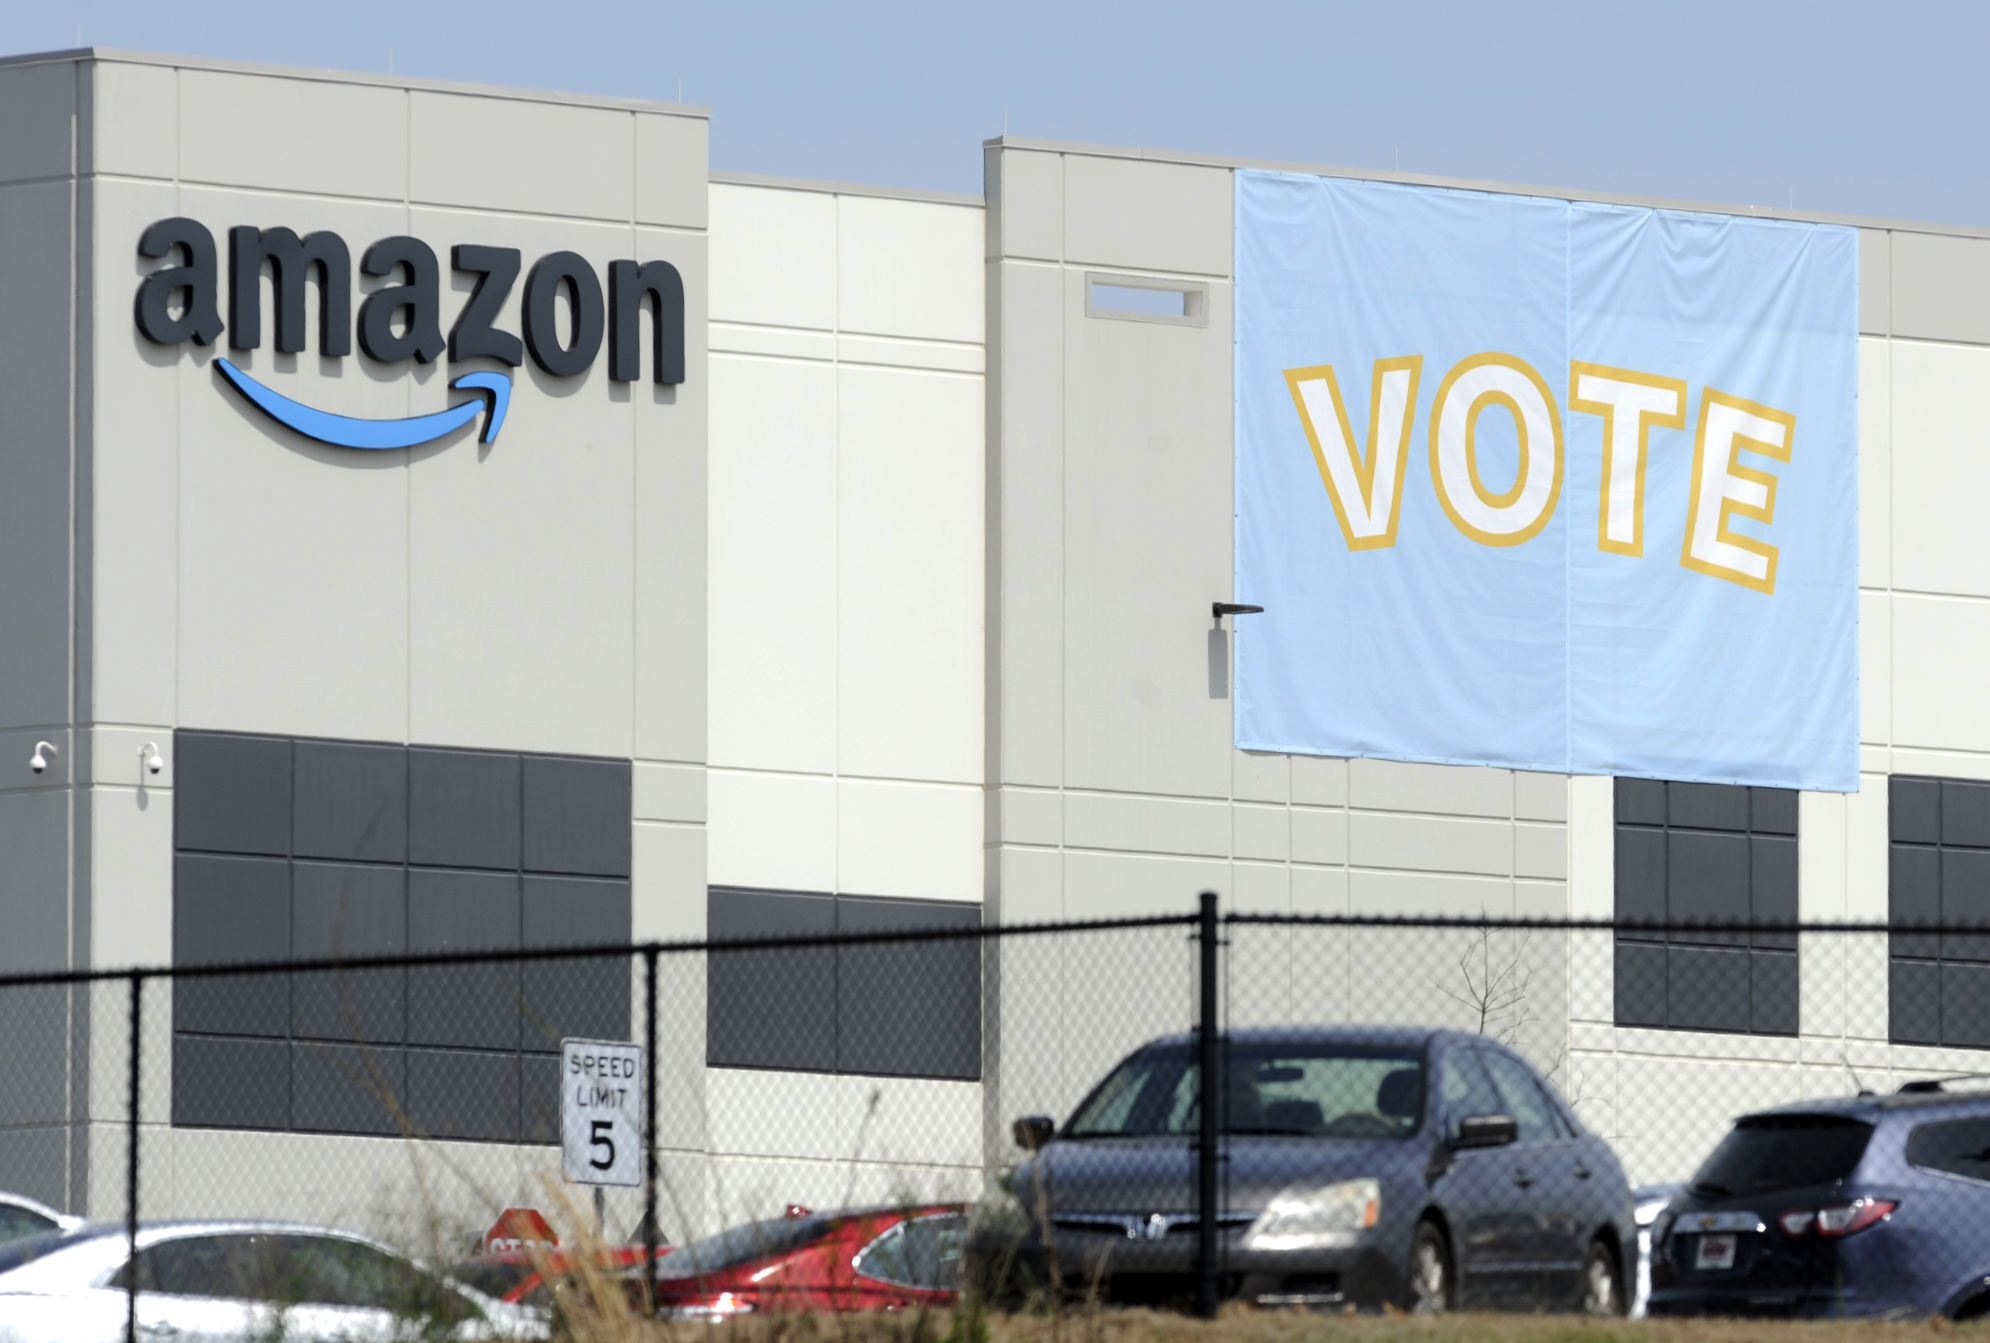 FILE - In this Tuesday, March 30, 2021 file photo, a banner encouraging workers to vote in labor balloting is shown at an Amazon warehouse in Bessemer, Ala. Vote counting in the union push in Bessemer is expected to start as early as Thursday, April 8, but hundreds of contested ballots could muddy the outcome if it’s a close race. (AP Photo/Jay Reeves, File)